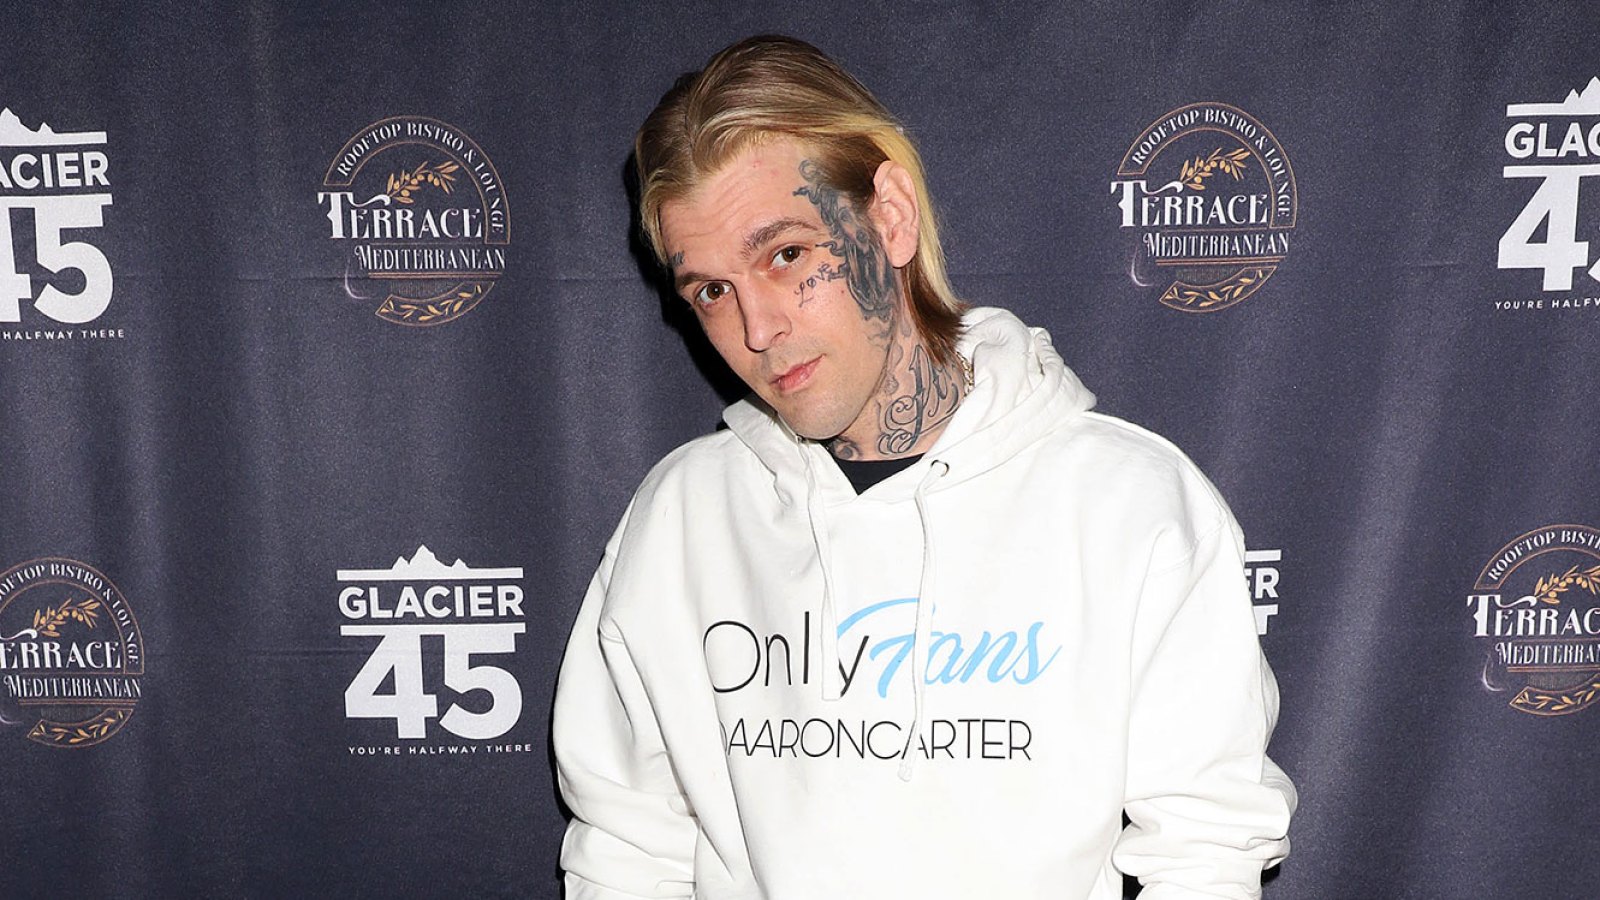 Aaron Carter Family Believe He Died After a Drug Overdose as They Await Coroner’s Report